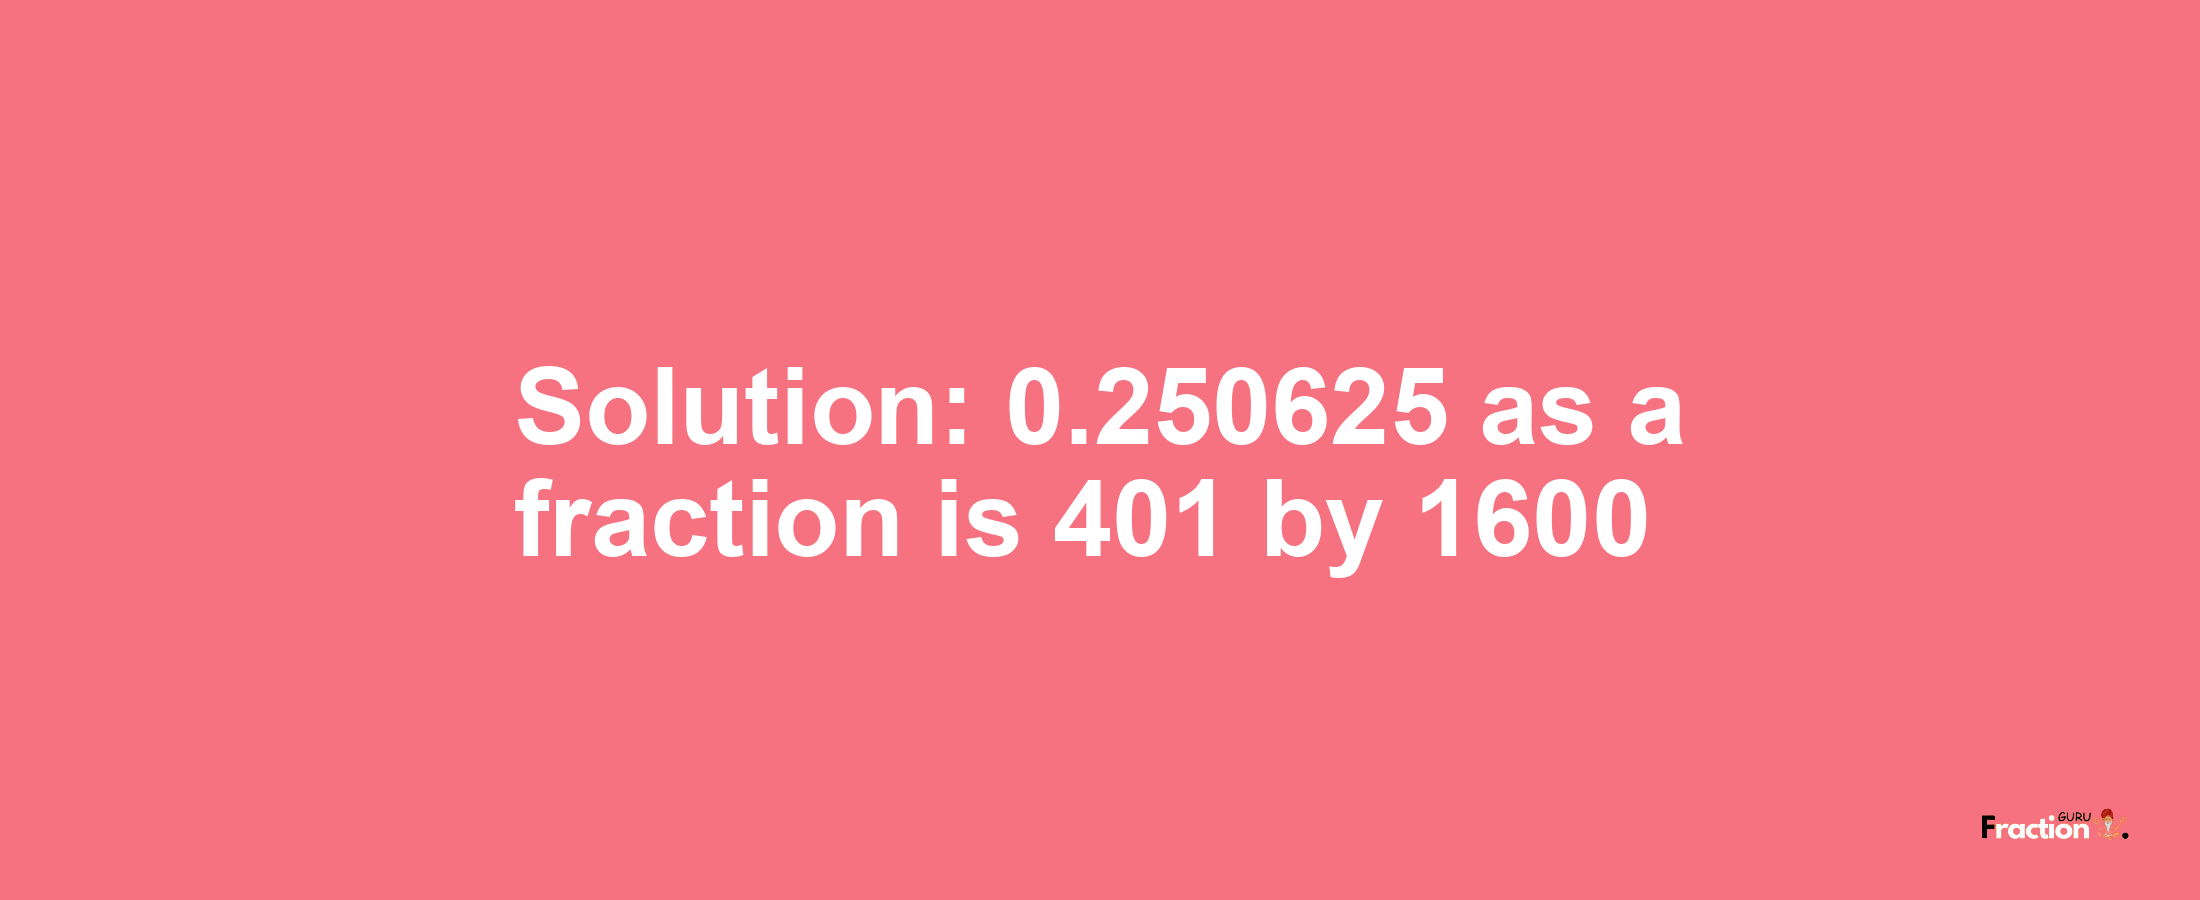 Solution:0.250625 as a fraction is 401/1600